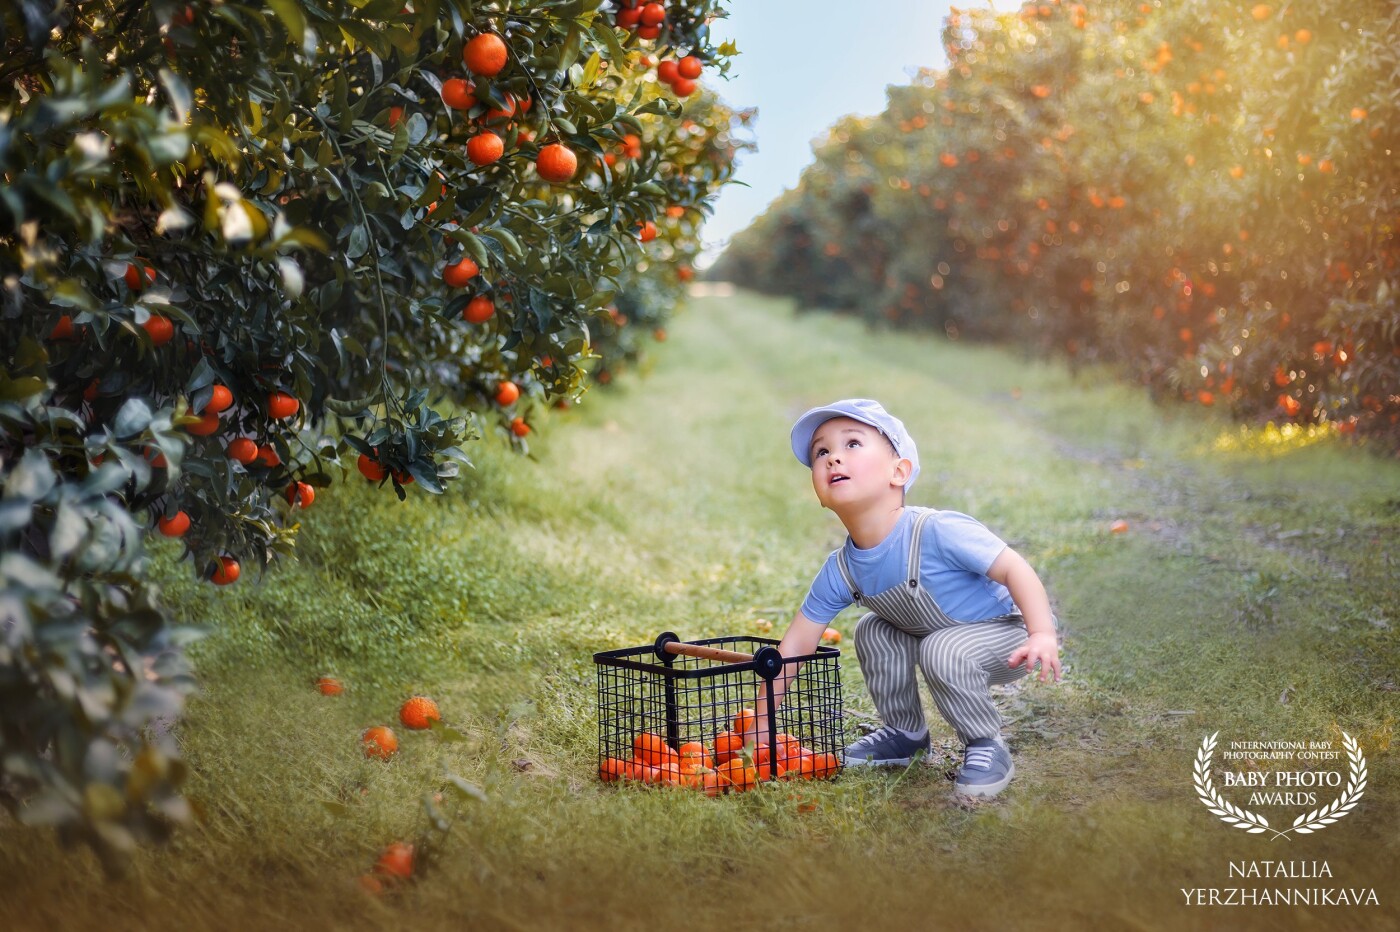 This was the first time the little boy saw mandarin fields. After moving from Arizona, he just discovered the magic of California's natural growing fruits.